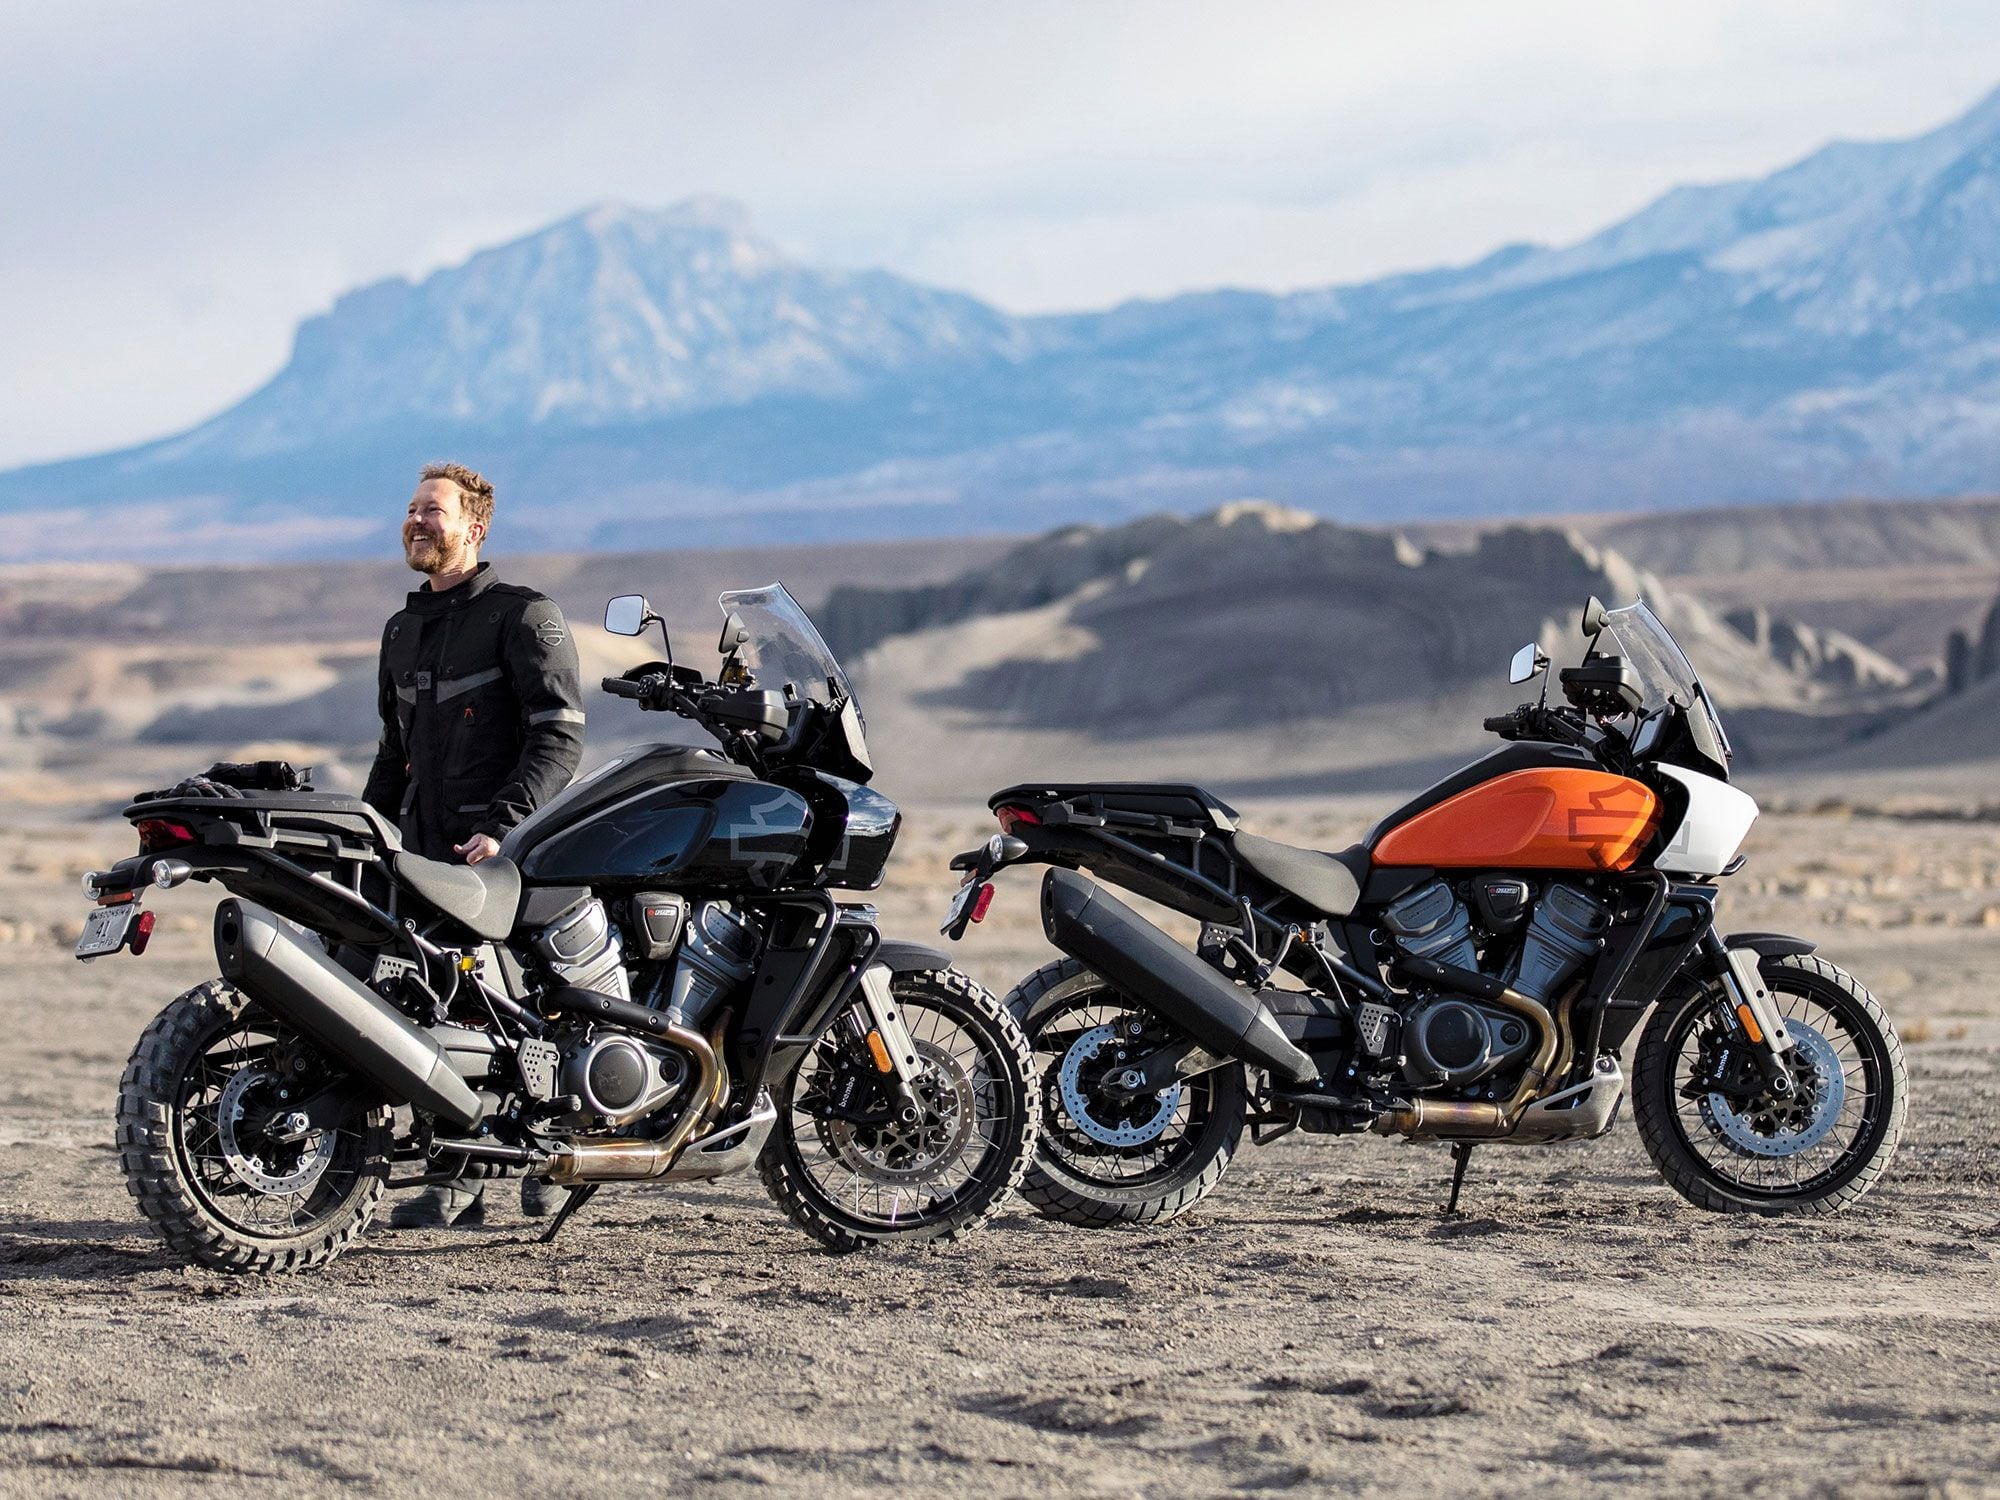 The Pan America has been revealed in two versions, the base 1250 and the better-equipped 1250 Special.